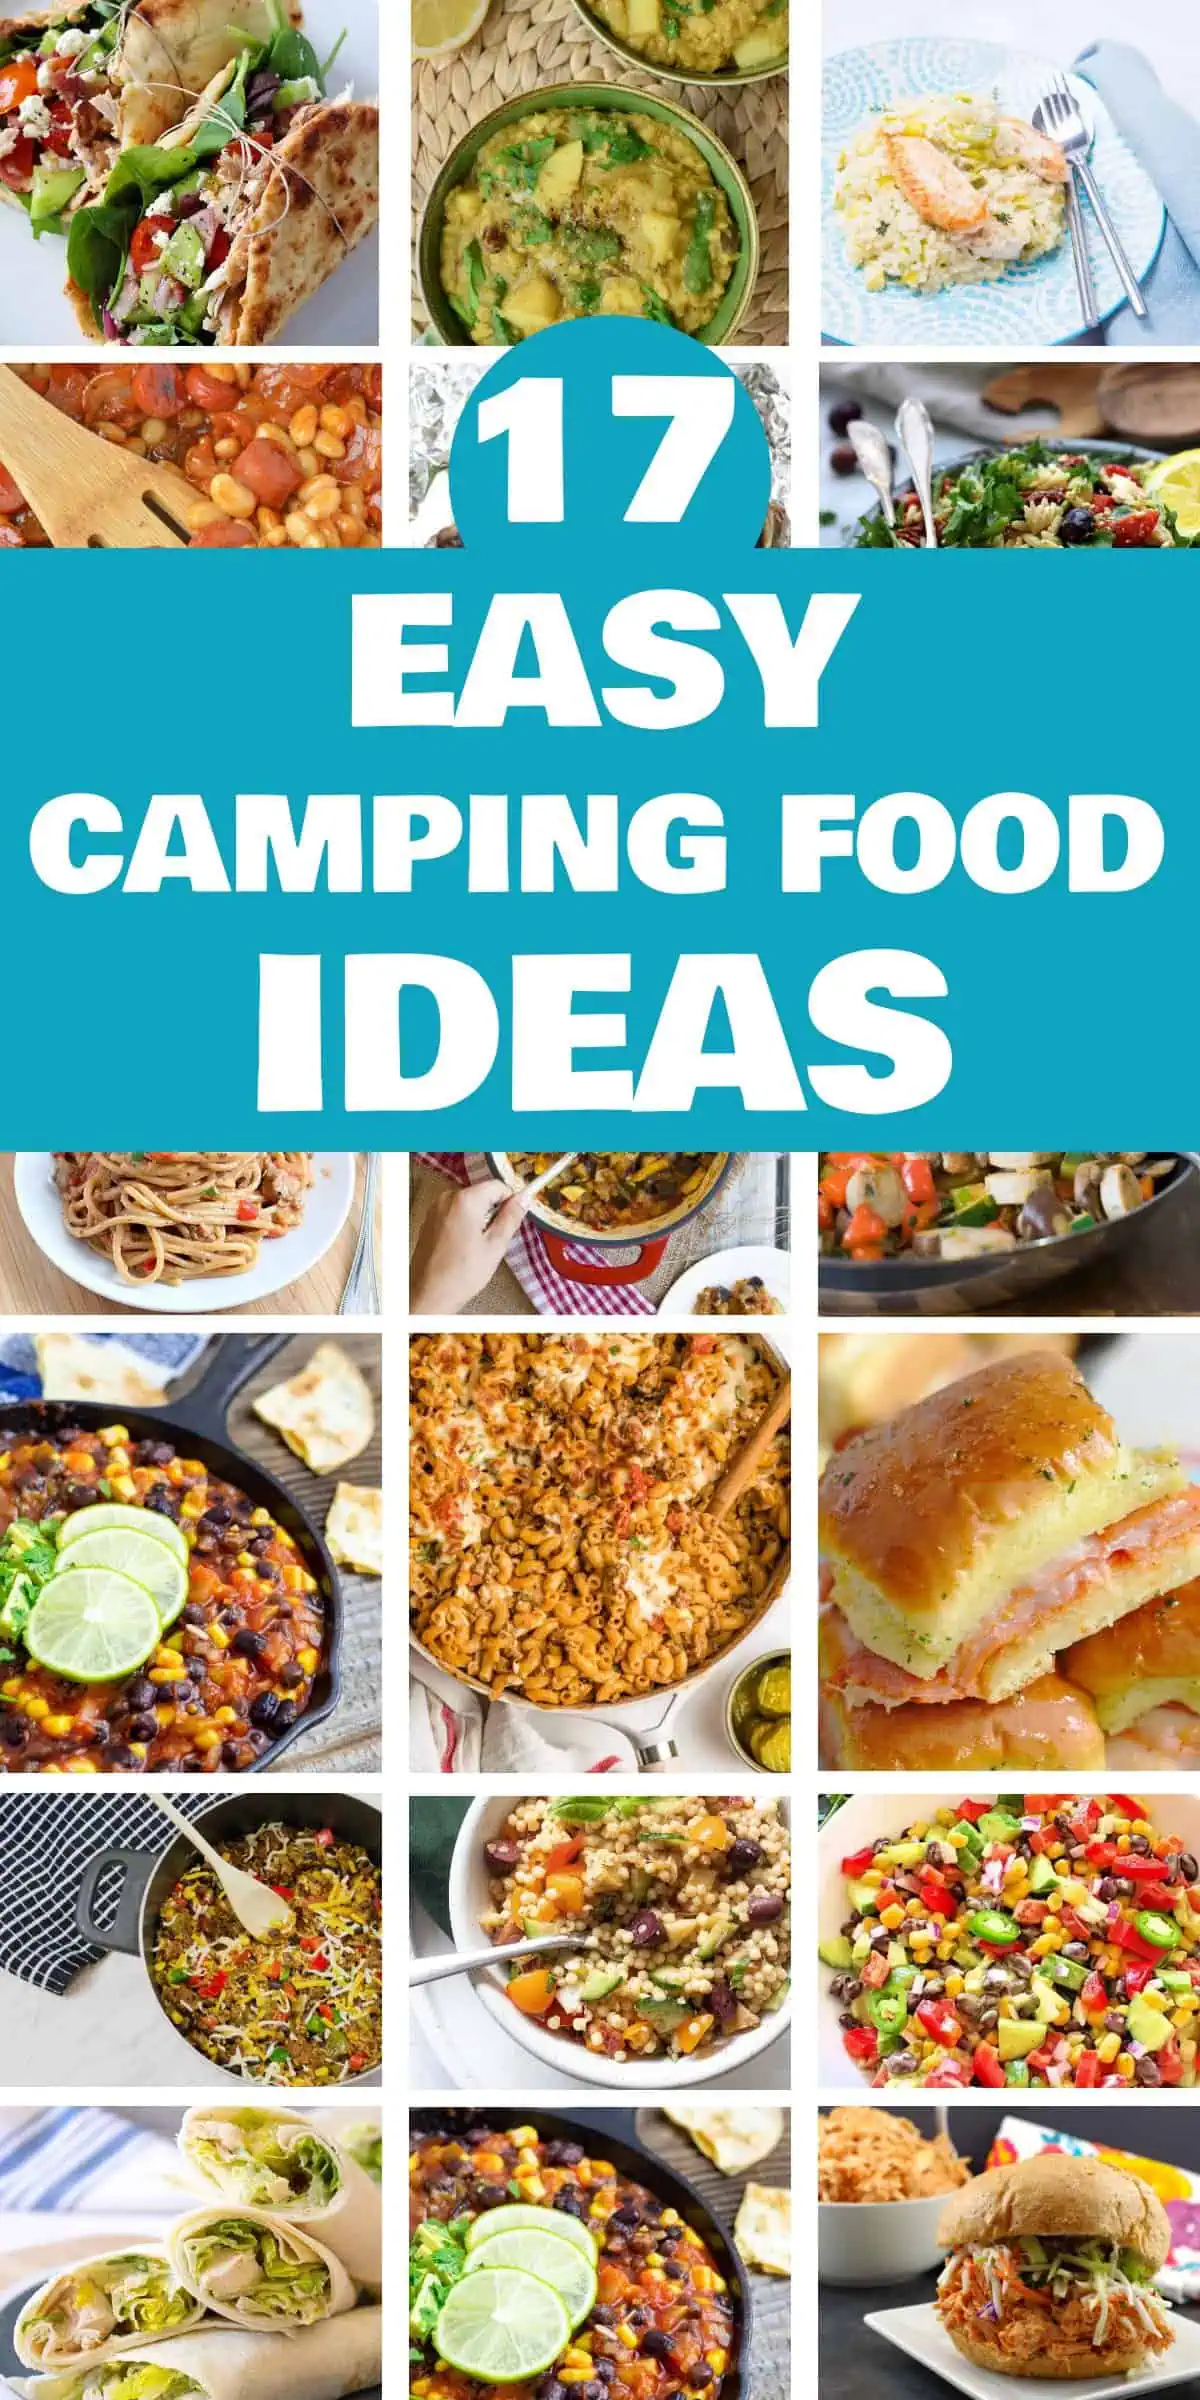 17 Easy Camping Food Ideas